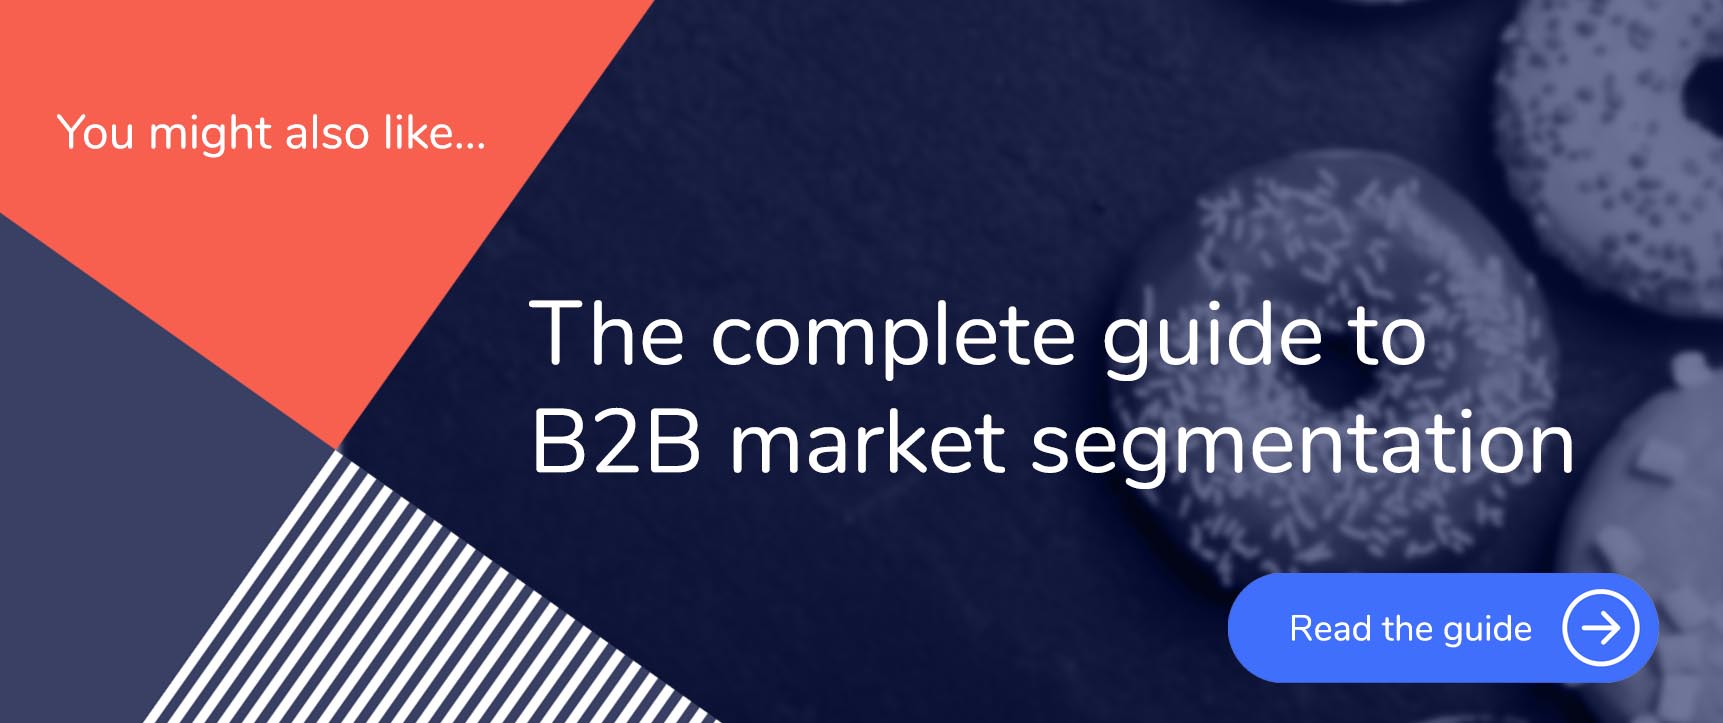 A link to our complete guide to b2b market segmentation